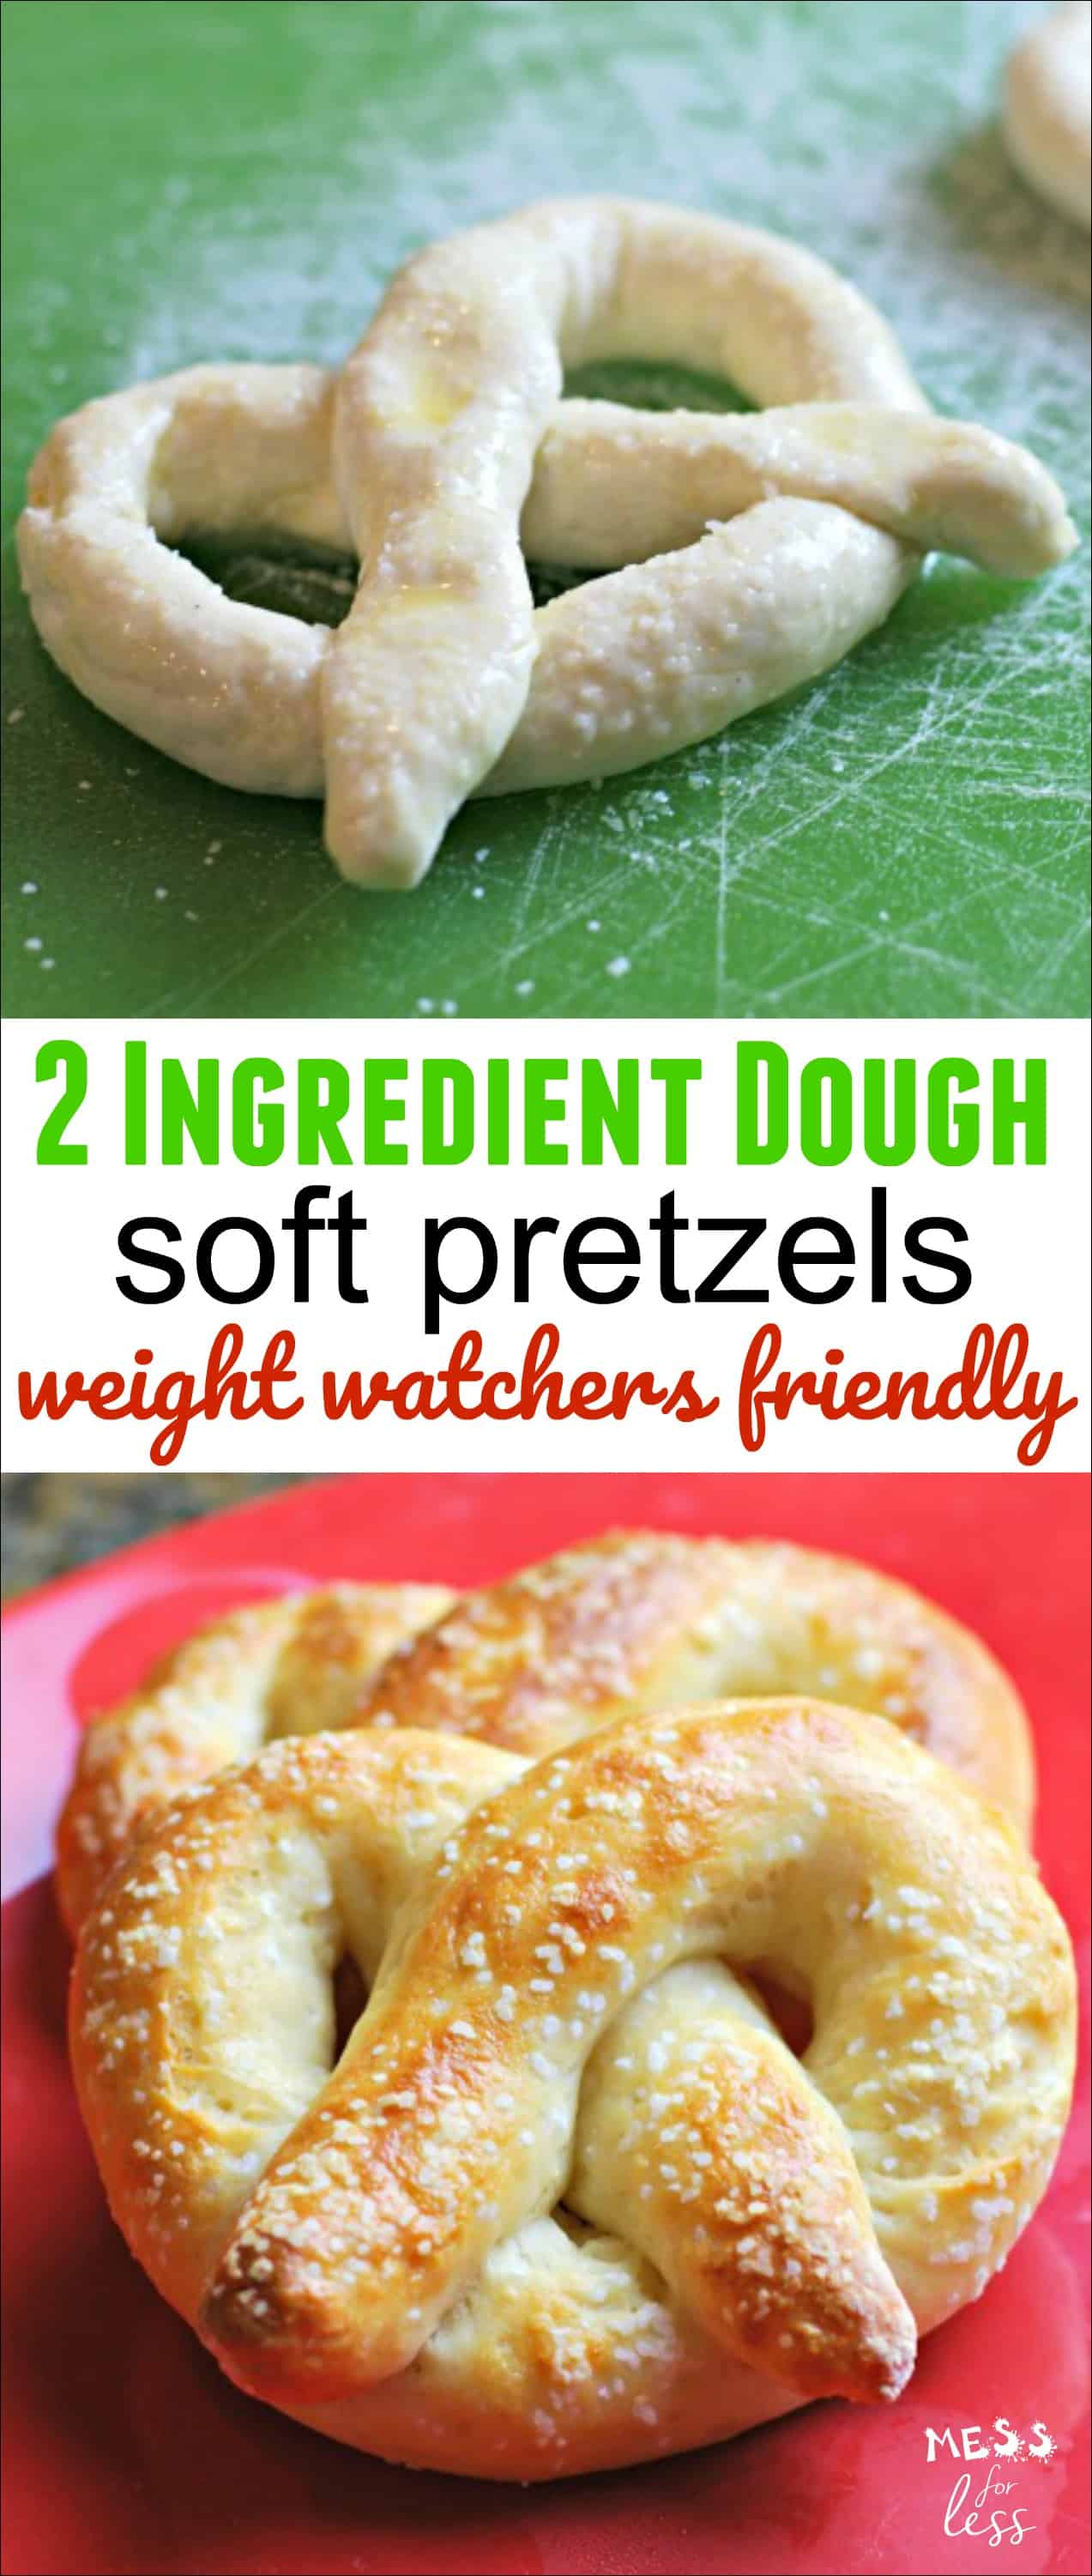 2 Ingredient Dough Pretzels - Weight Watchers friendly! This soft pretzel recipe is easy to make and will allow you to enjoy a pretzel with no guilt. Squeeze on some mustard and enjoy! 